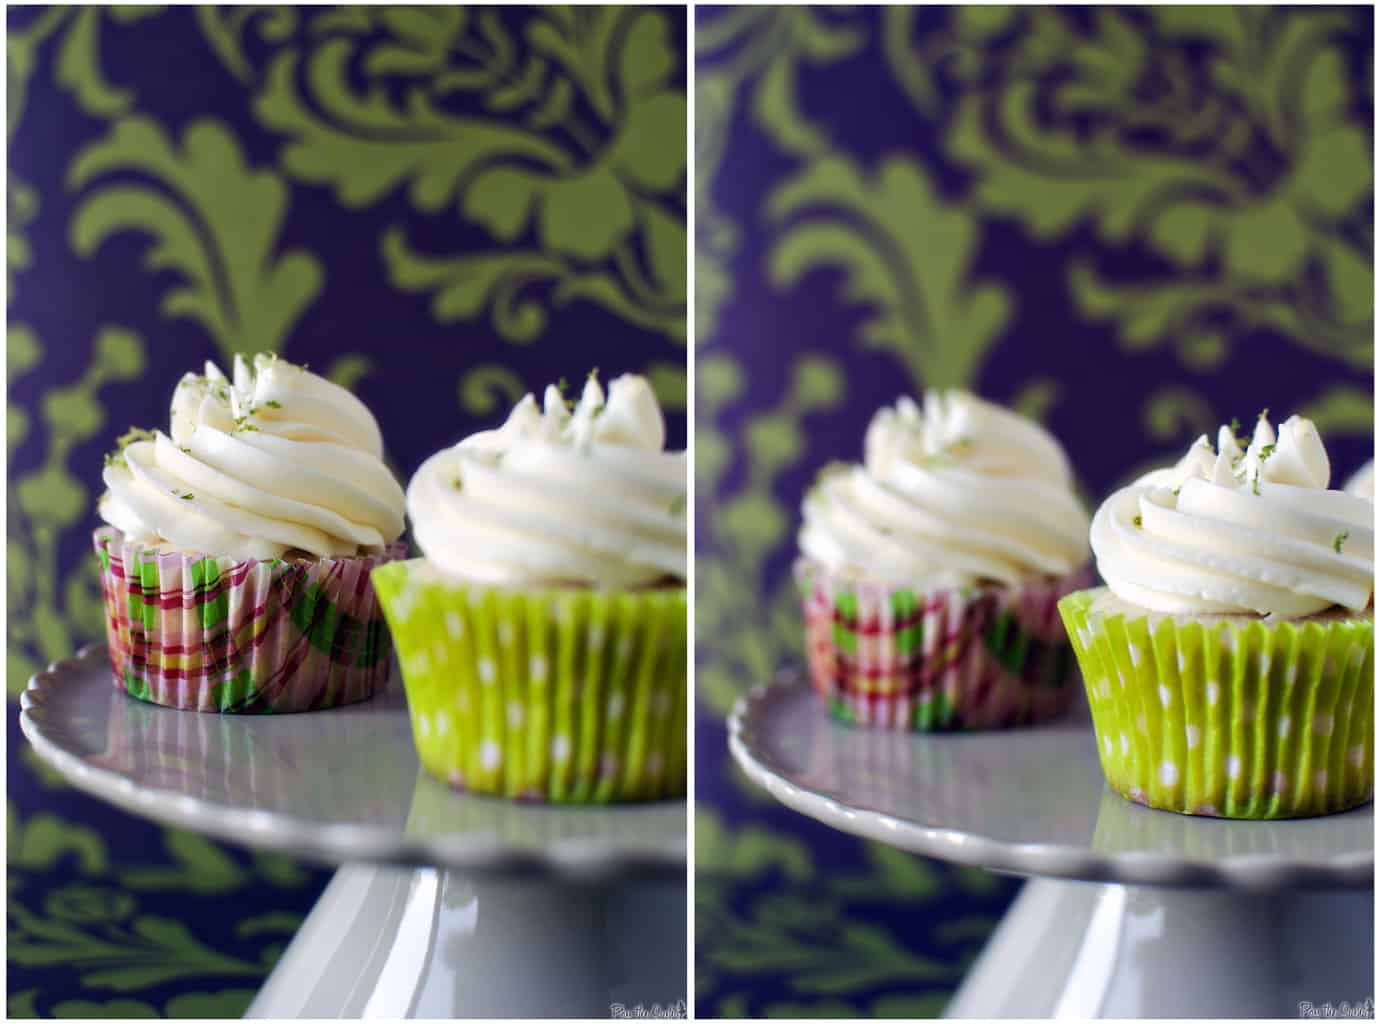 Margarita cupcakes pair a perfectly sweet vanilla-lime cupcake with the boozy goodness of tequila. They're a hit at any summer party! \\ Recipe on PassTheSushi.com